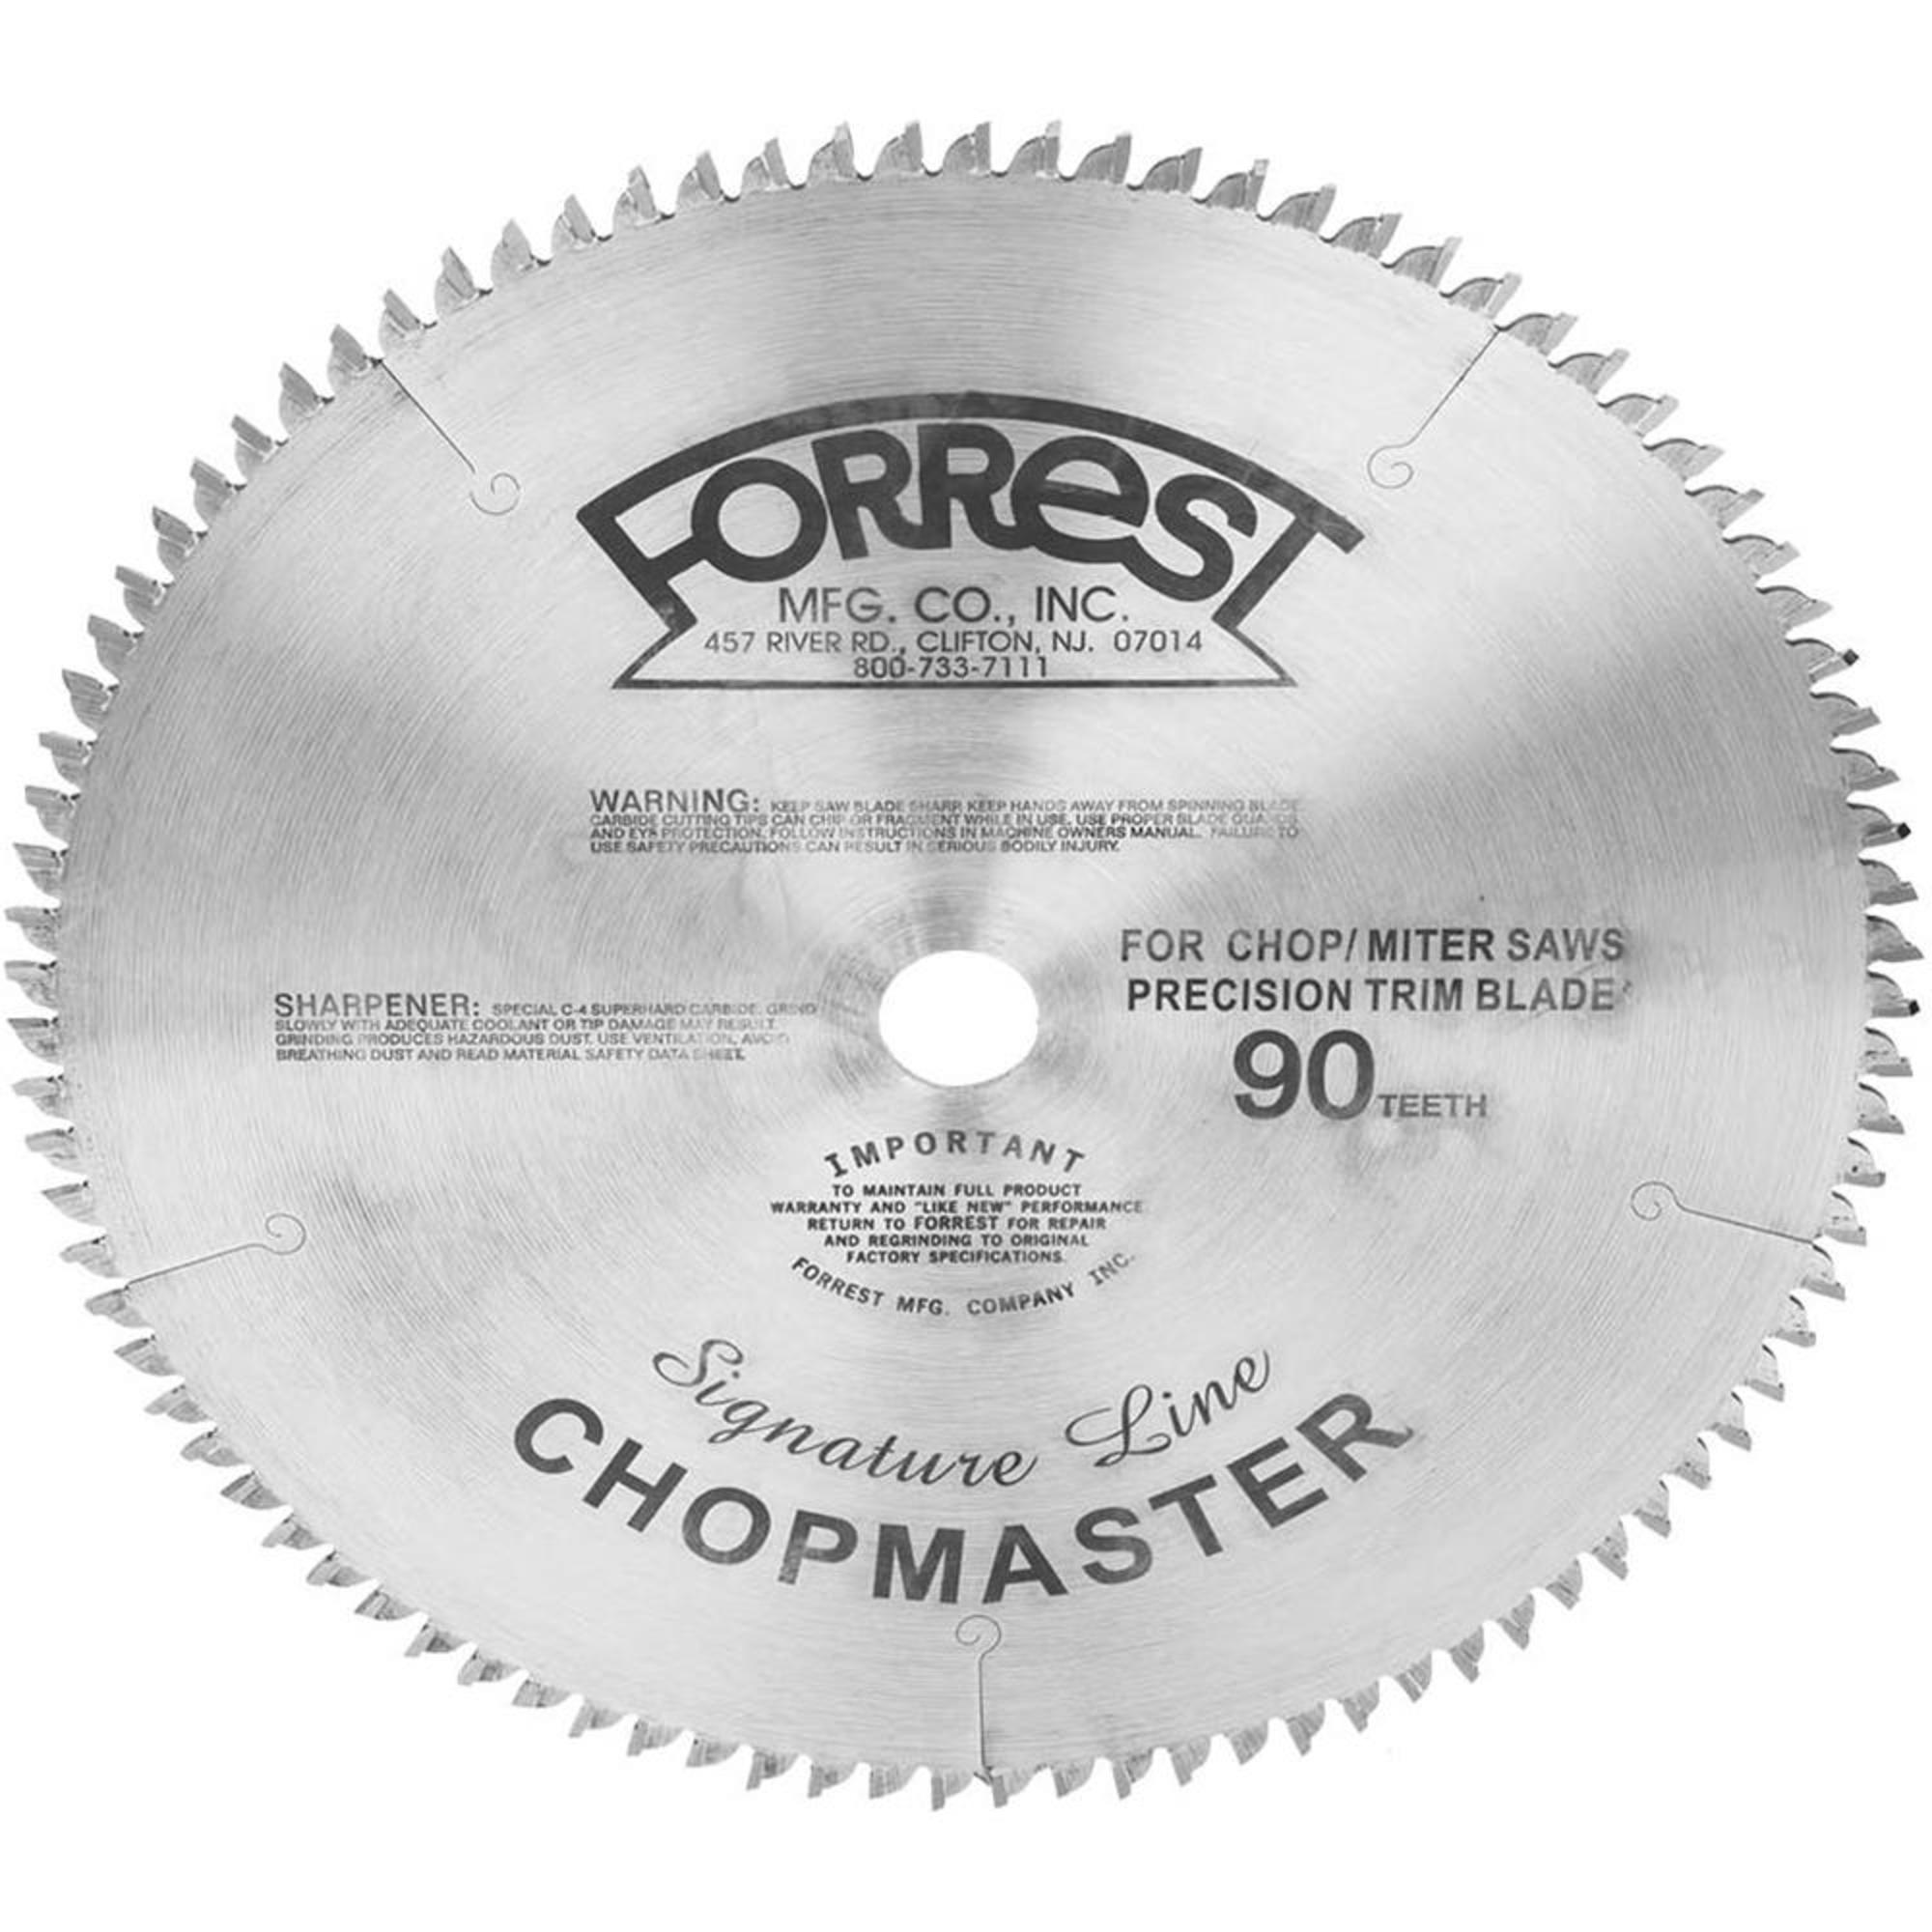 Shop for Miter Saw Blades at Prime Tools: BladeToothStyle-2 PTS+1 Flat,  BladeToothStyle-4 PTS+1 Flat, BladeToothStyle-ATB, Miter Saw Blades, Size-D  10 T 40 K 1/8 A 5/8 TS ATB,